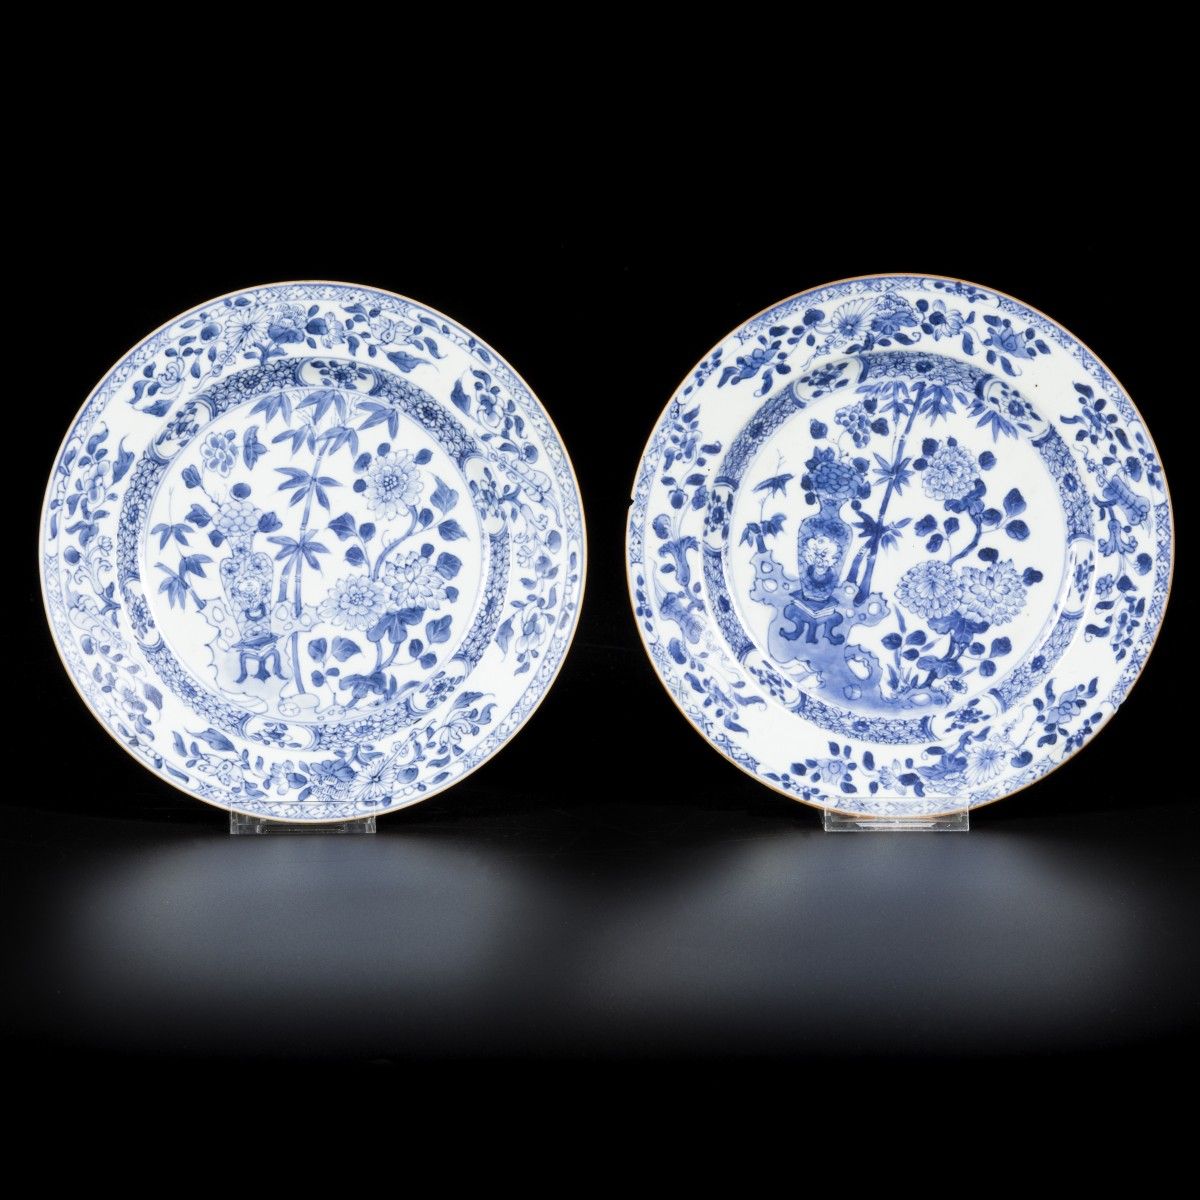 A set of (2) porcelain plates with floral decoration, China, 18th century. Durch&hellip;